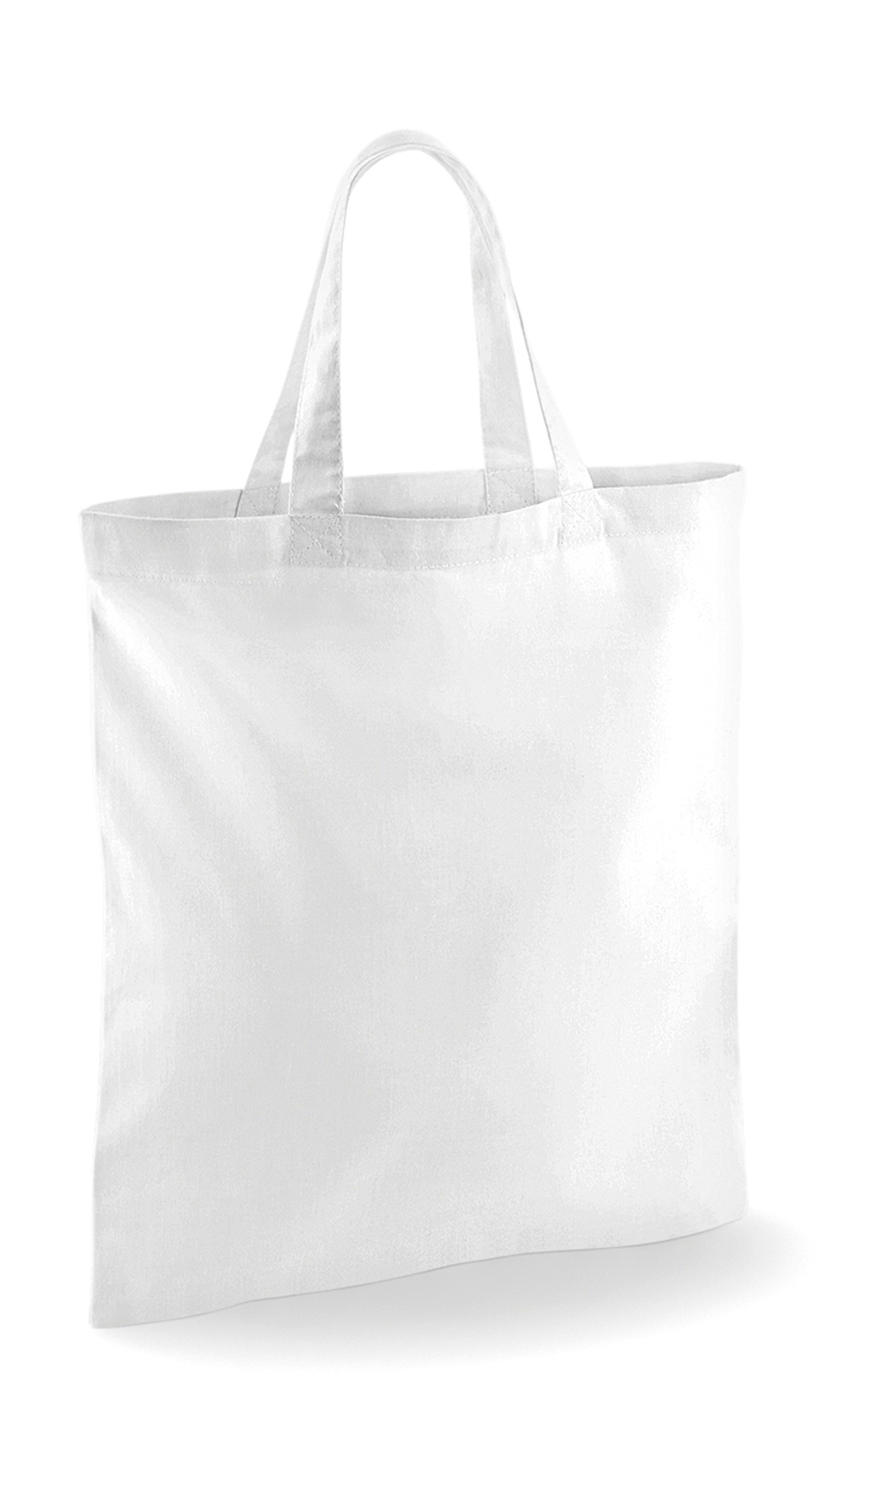  Bag for Life SH in Farbe White